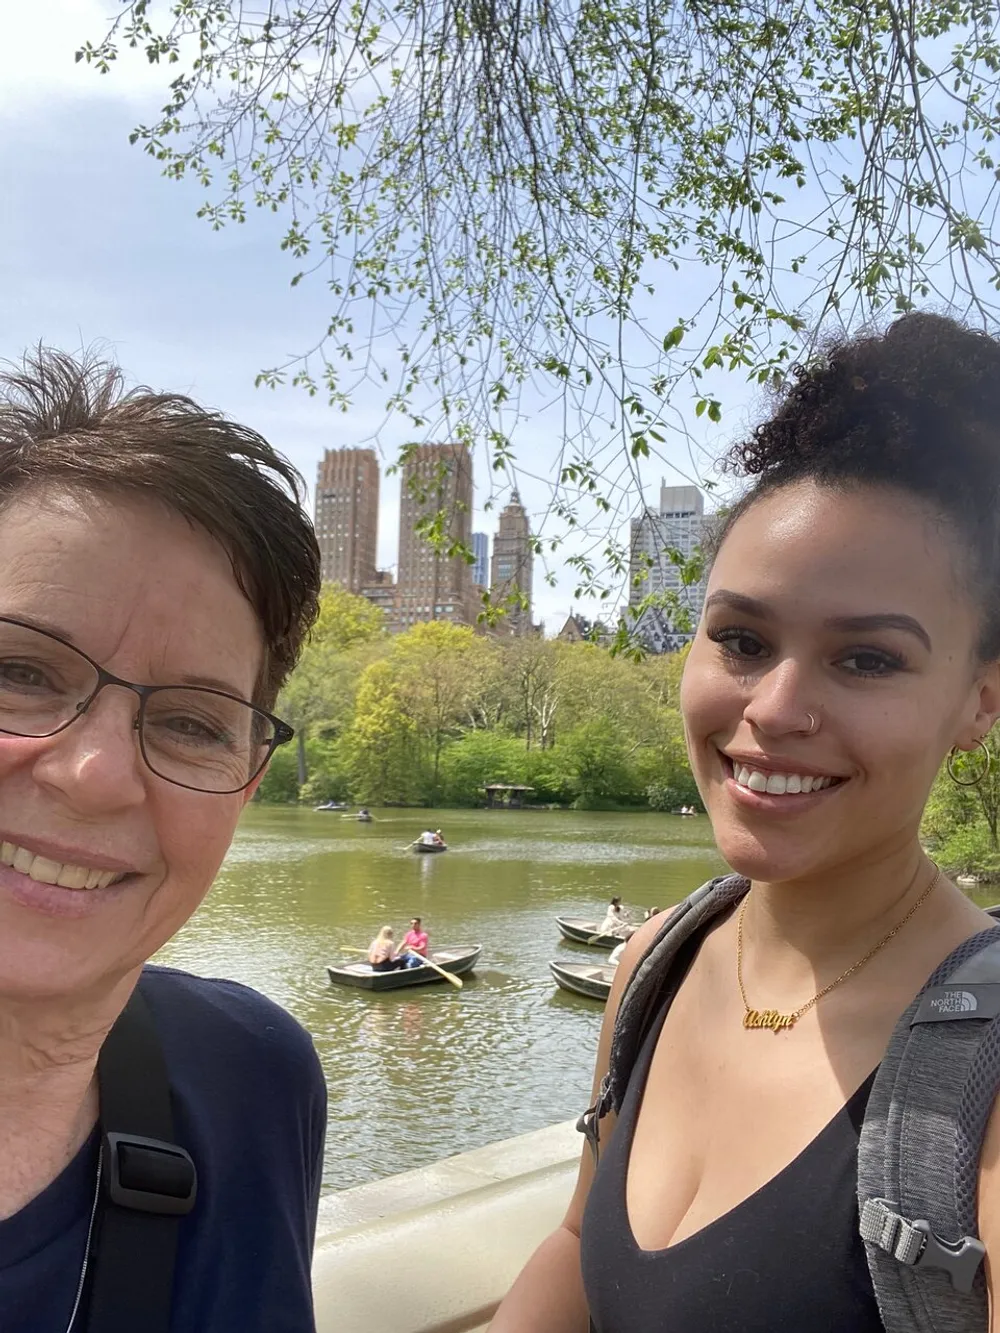 Two people are smiling for a selfie with a scenic backdrop of a lake with boaters and urban high-rises under a clear sky